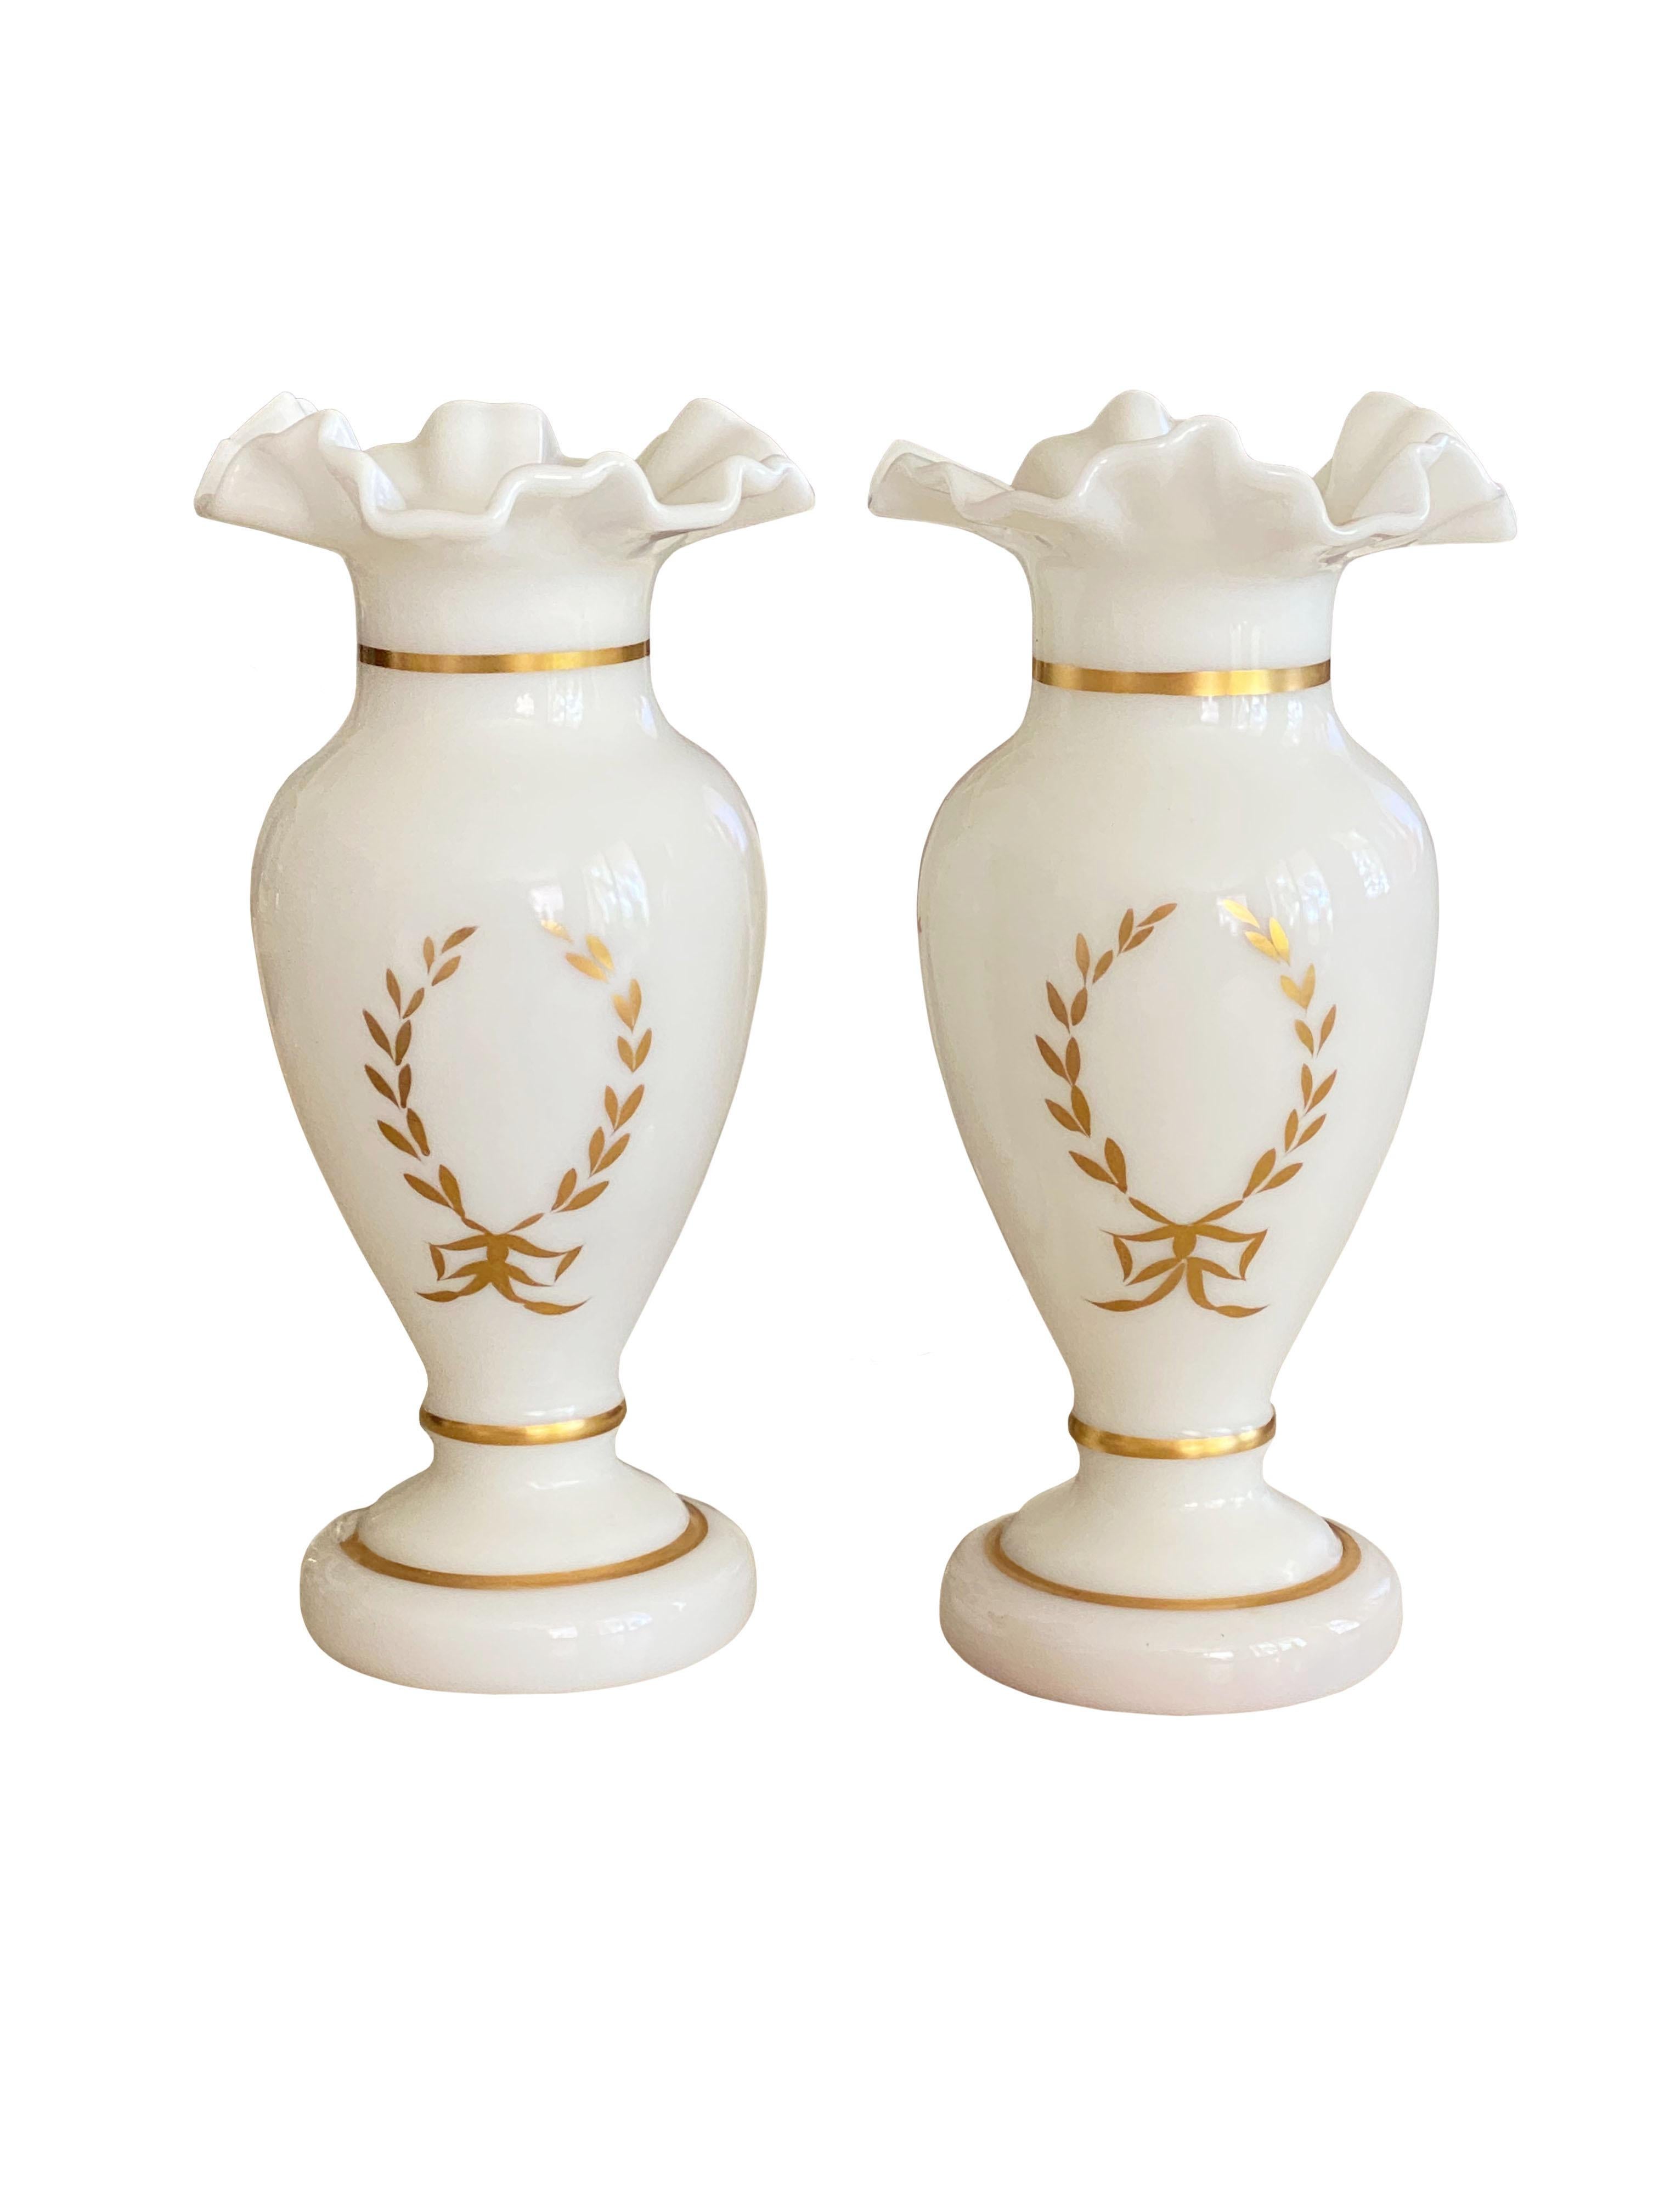 French Antique White and Gilt Opaline Vases, a Pair For Sale